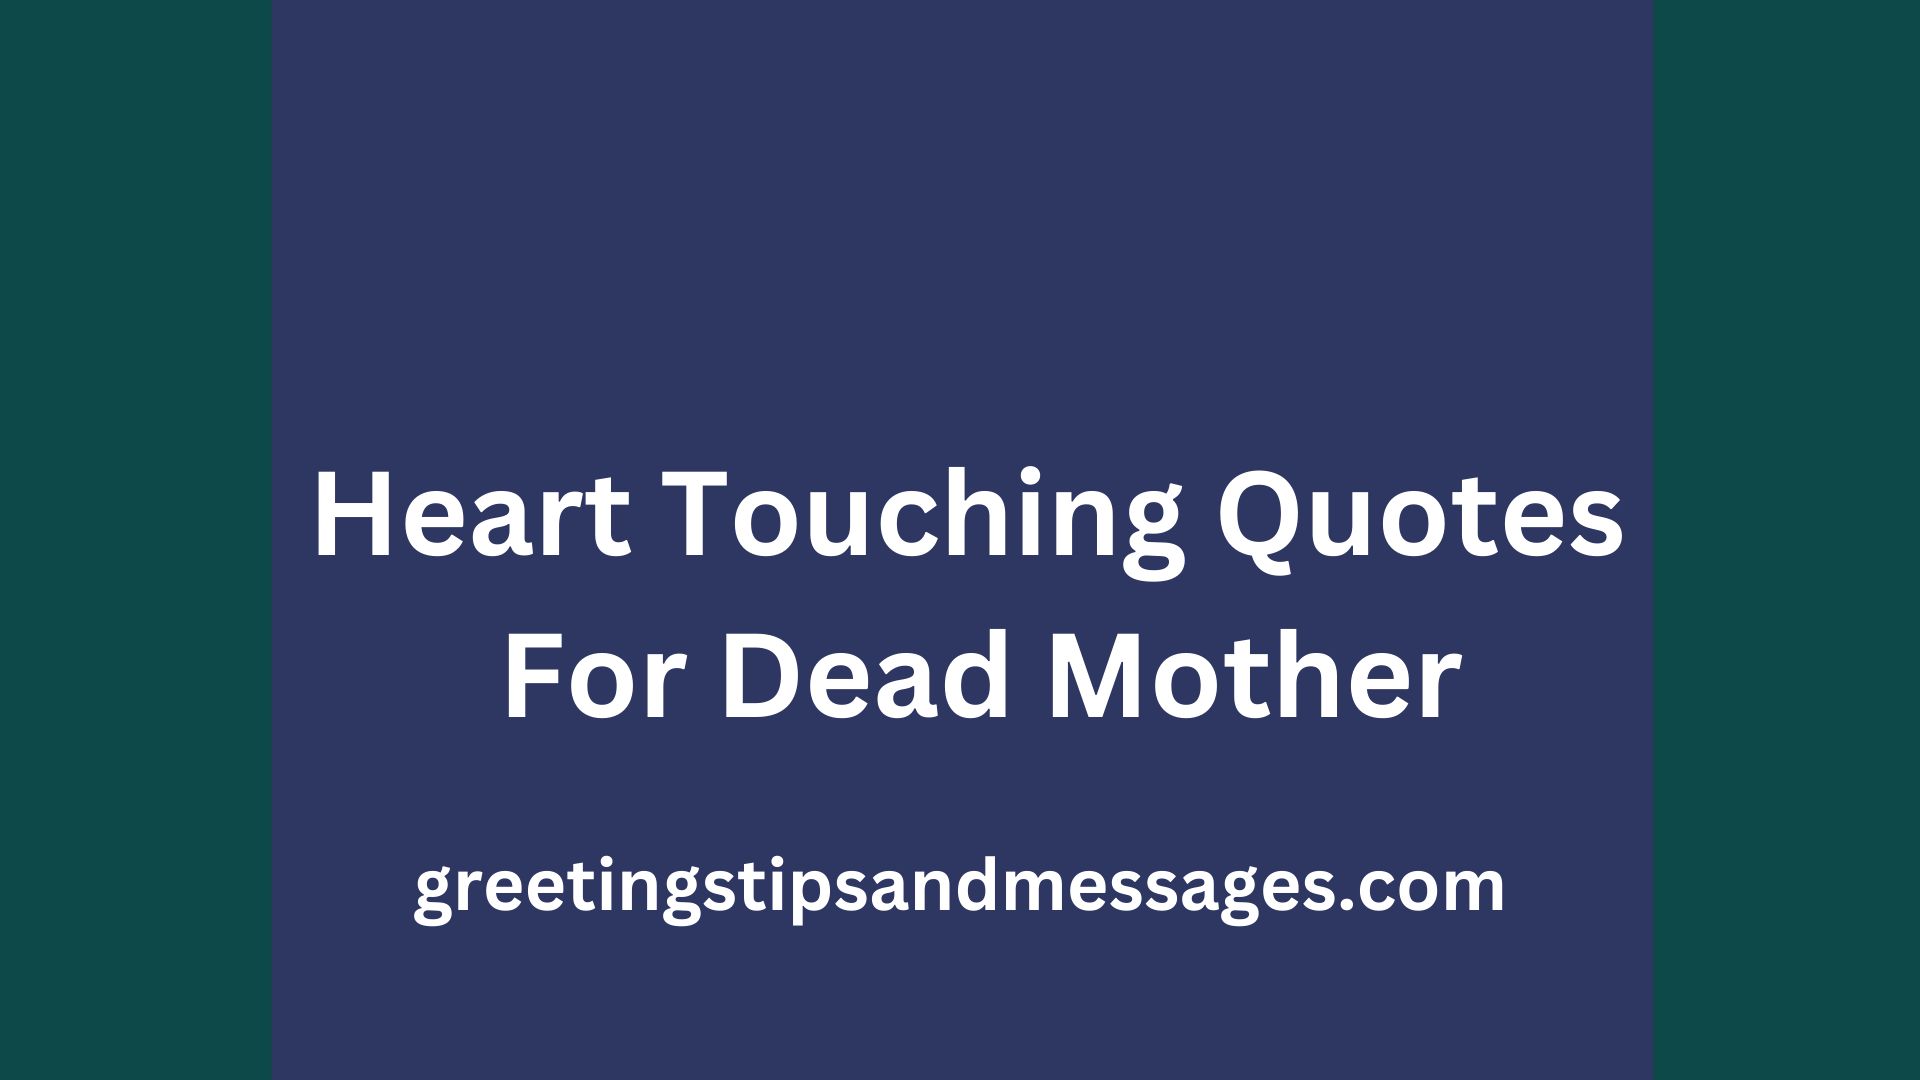 Heart Touching Quotes For Dead Mother